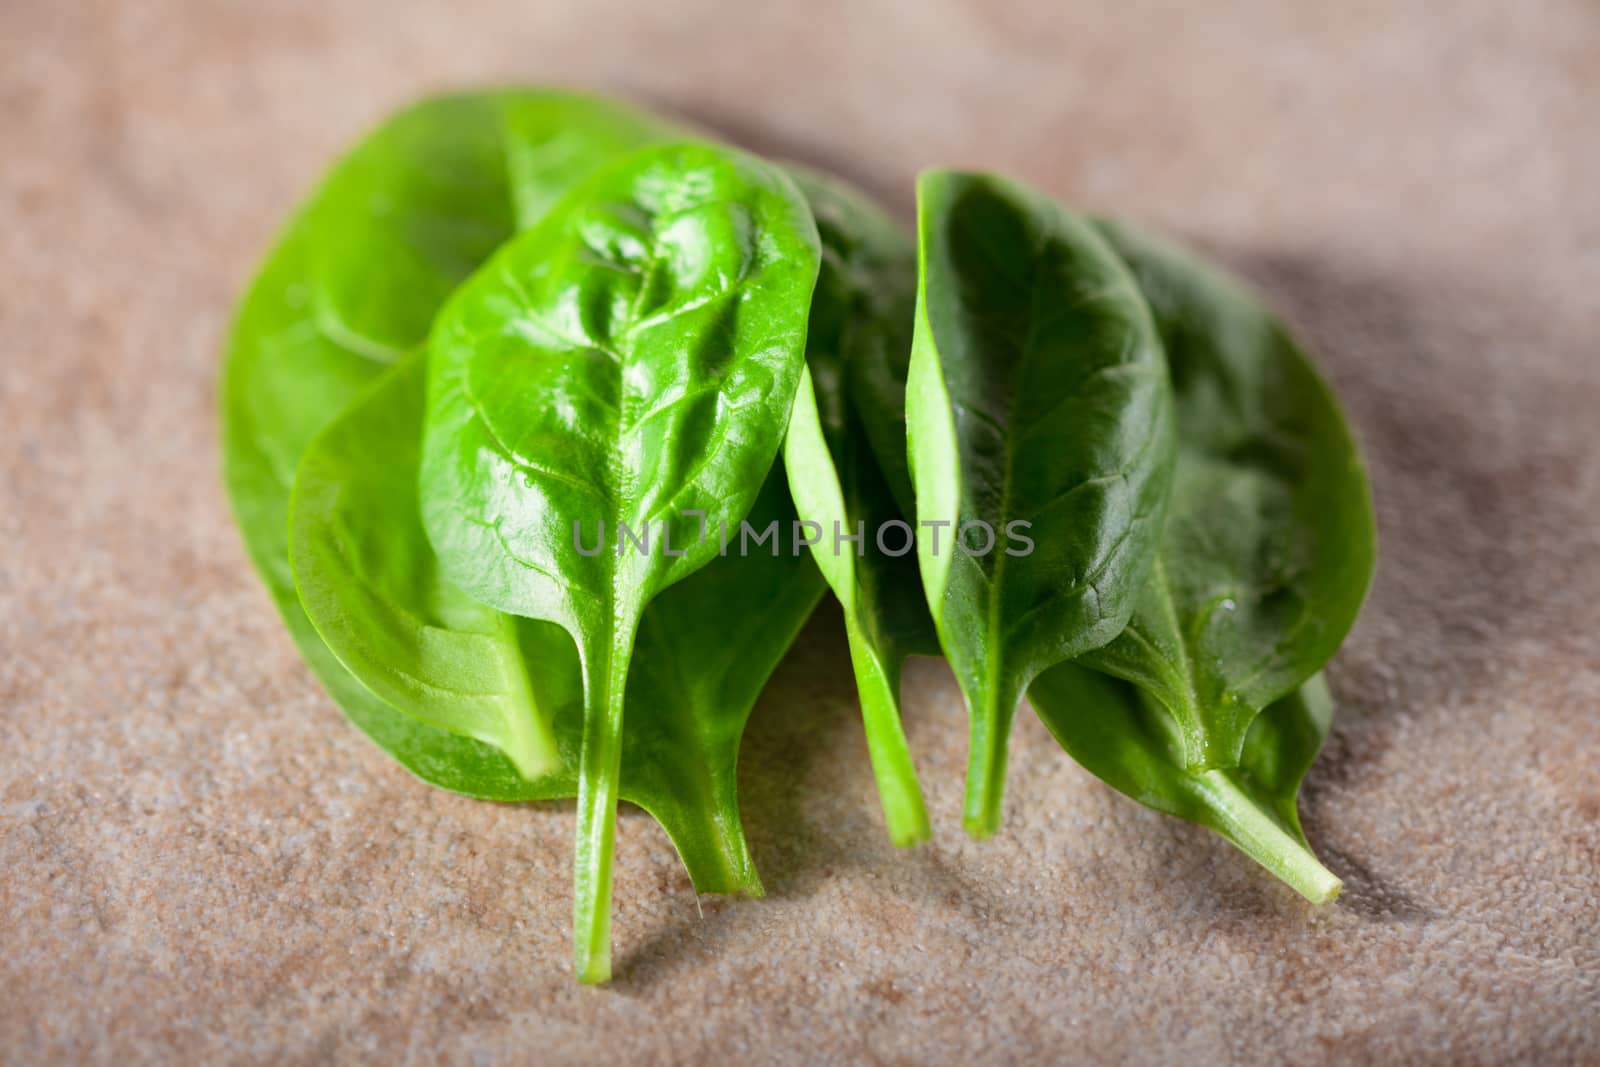 A bunch of Baby spinach on a ceramic surface